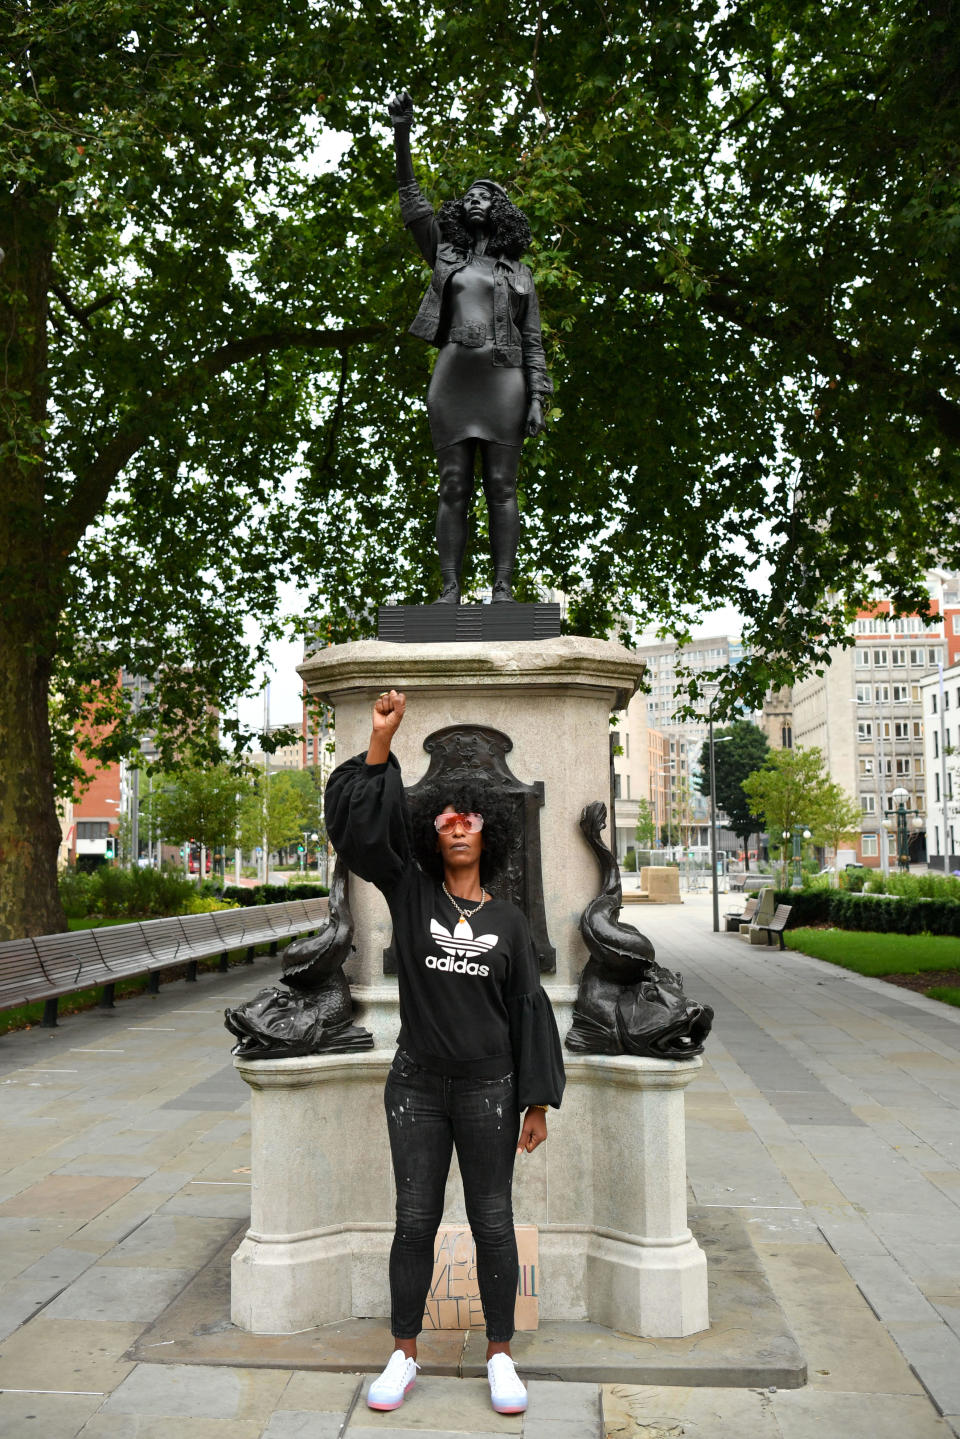 Black Lives Matter protestor Jen Reid poses for a photograph in front of a sculpture of herself, by local artist Marc Quinn, on the plinth where the Edward Colston statue used to stand on July 15, 2020 in Bristol, England. / Credit: Getty Images